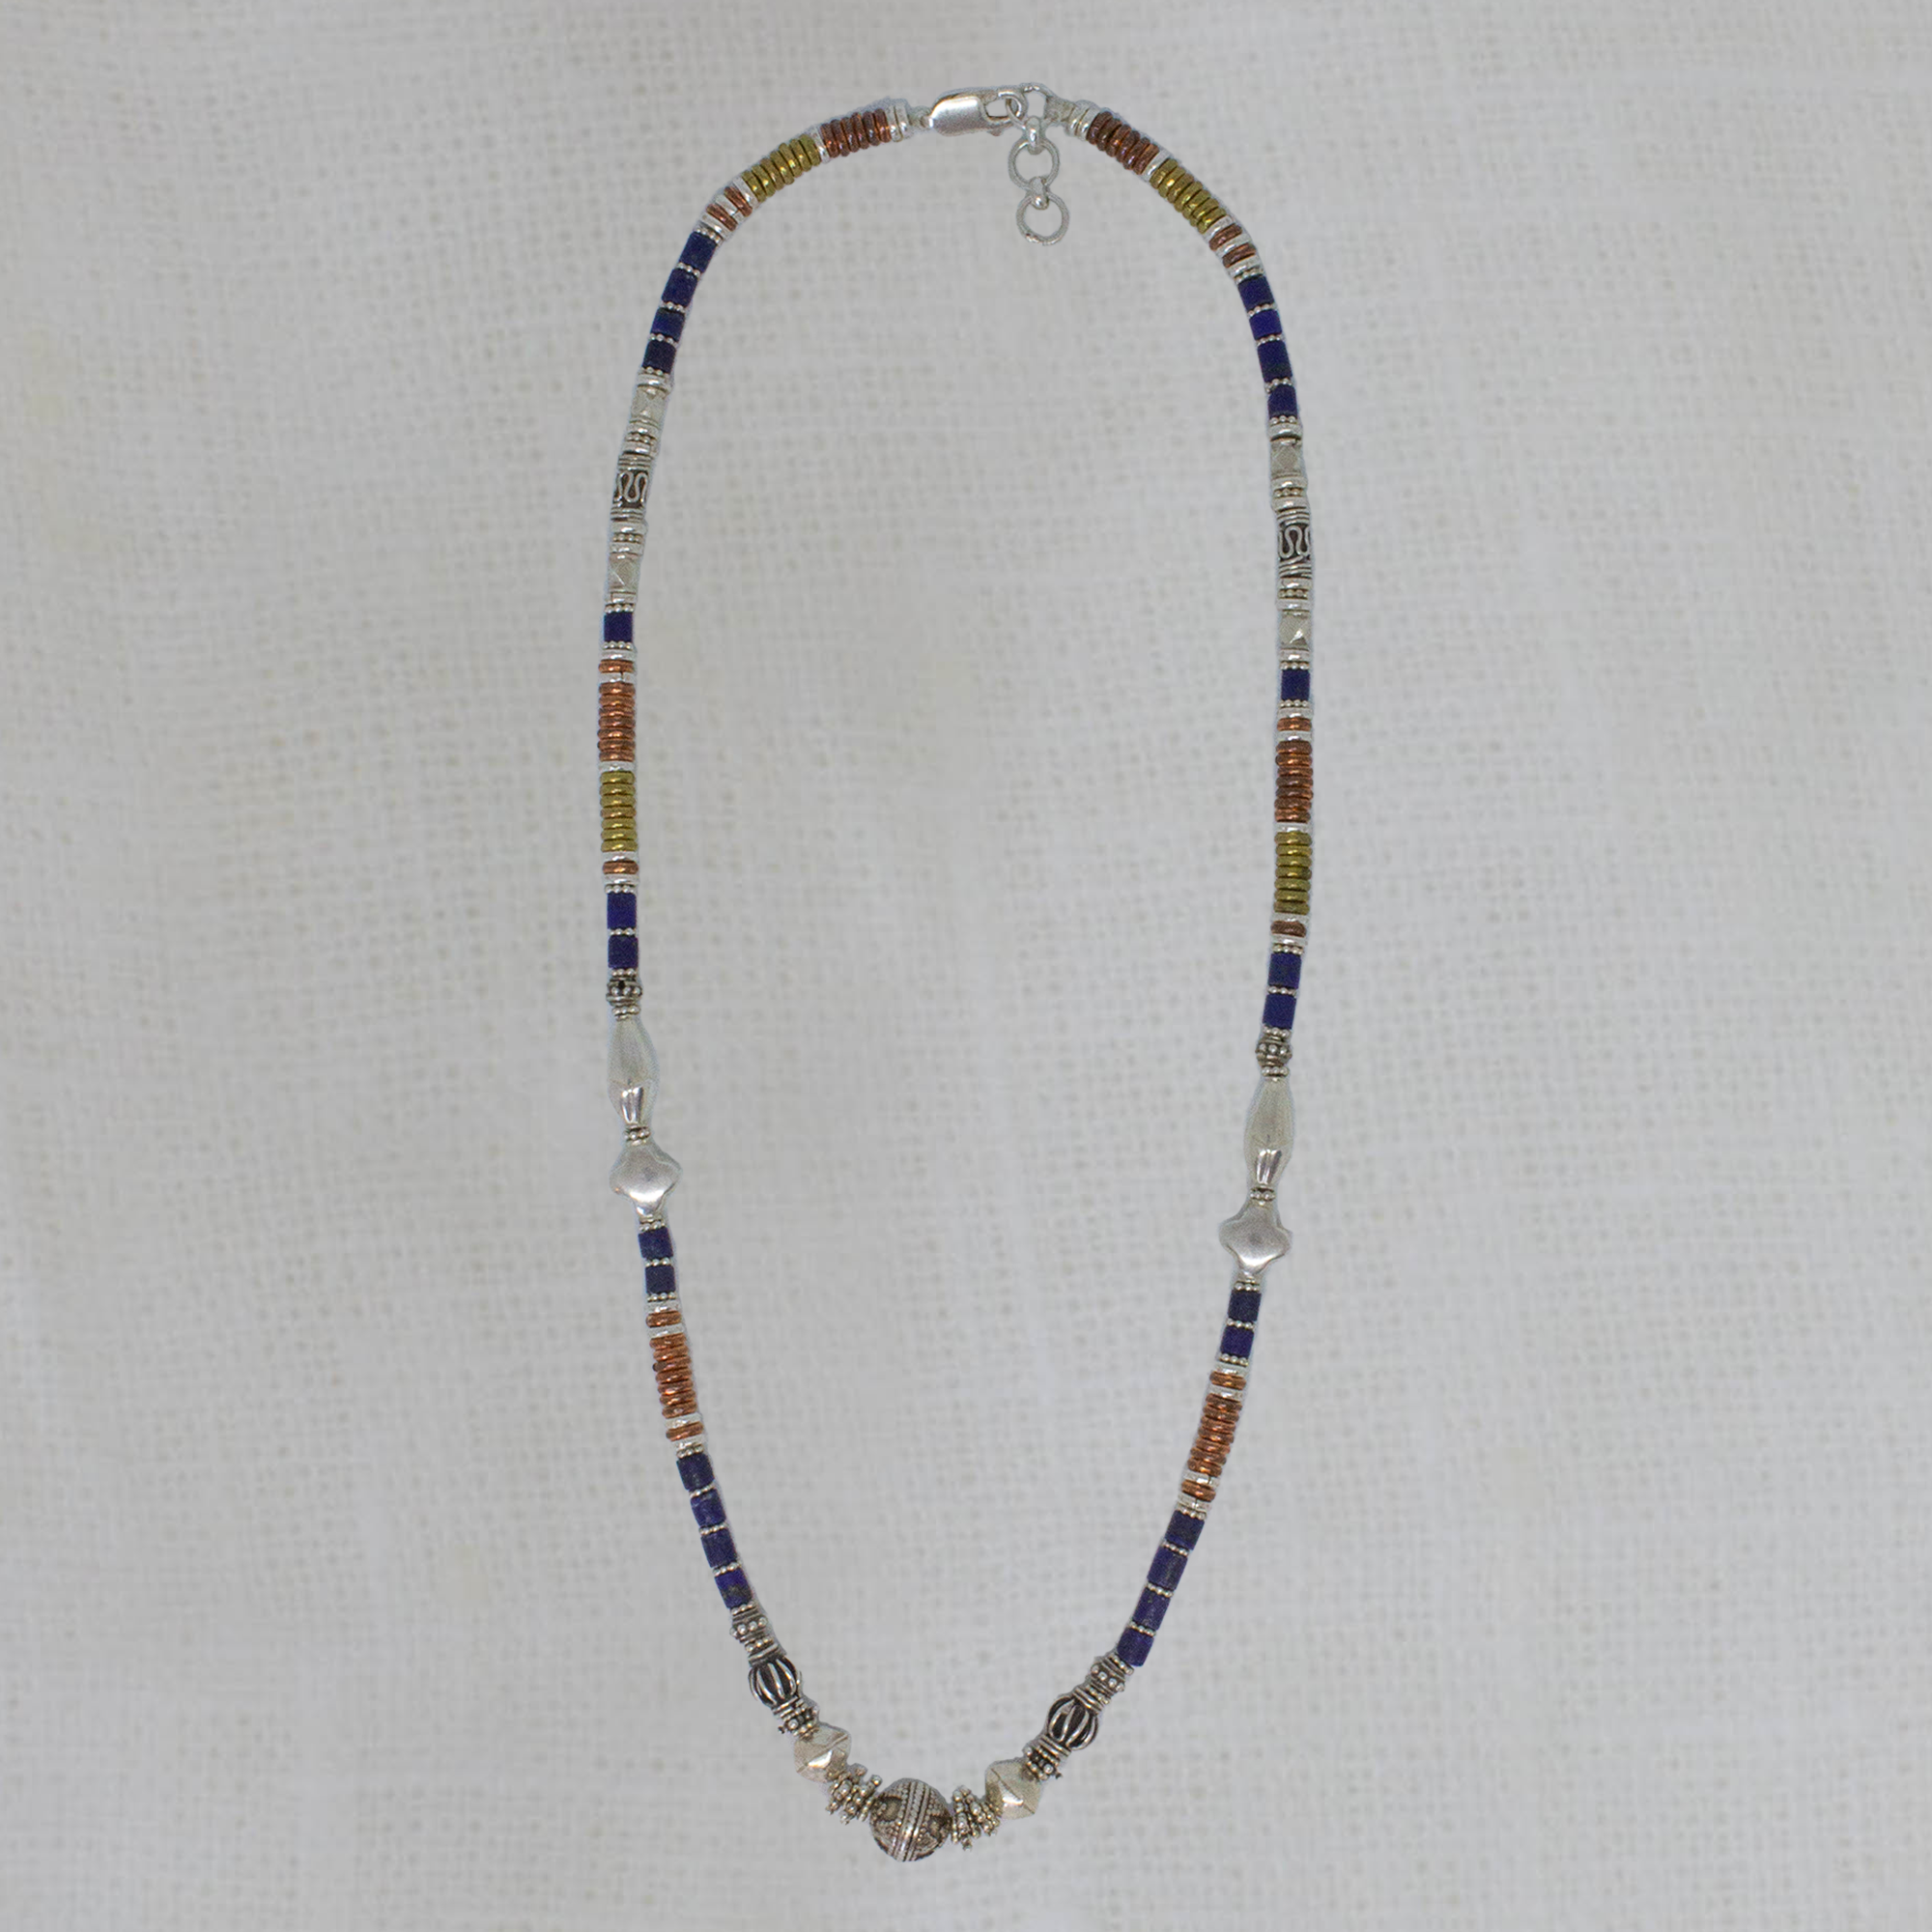 Mixed Metals and Gemstone Feature Bead Necklace - Beyond Biasa